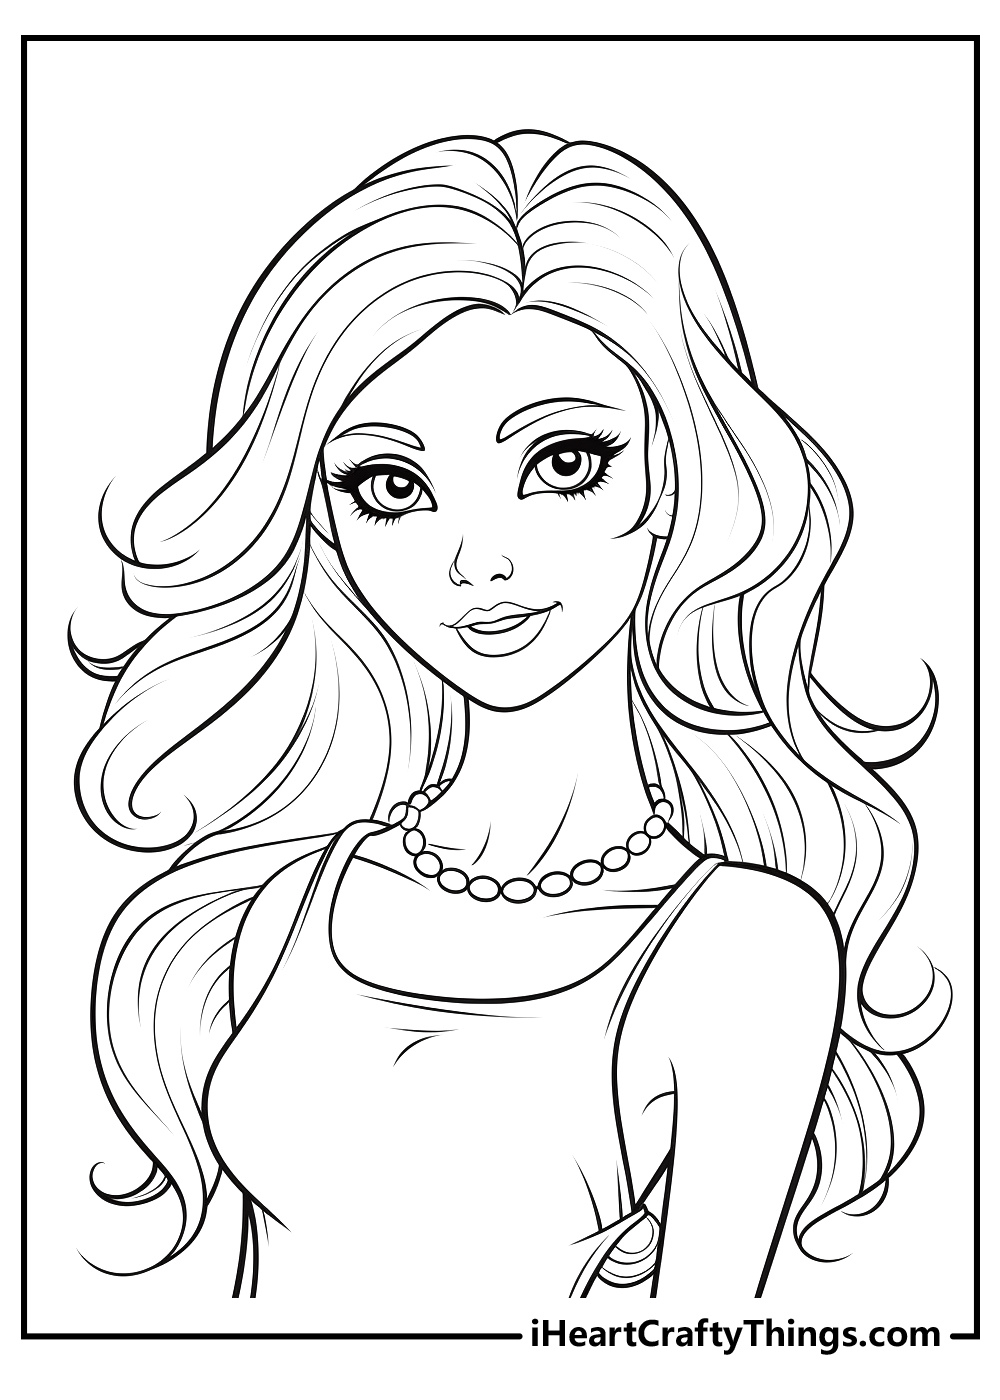 Barbie Coloring Book: +50 Barbie Coloring Book For Girls 4-12 With  Exclusive Images,+50 Amazing Barbie Drawings,Awesome Adorable Gift With  High Quality Colouring Pages by Sophie TP Colouring Books